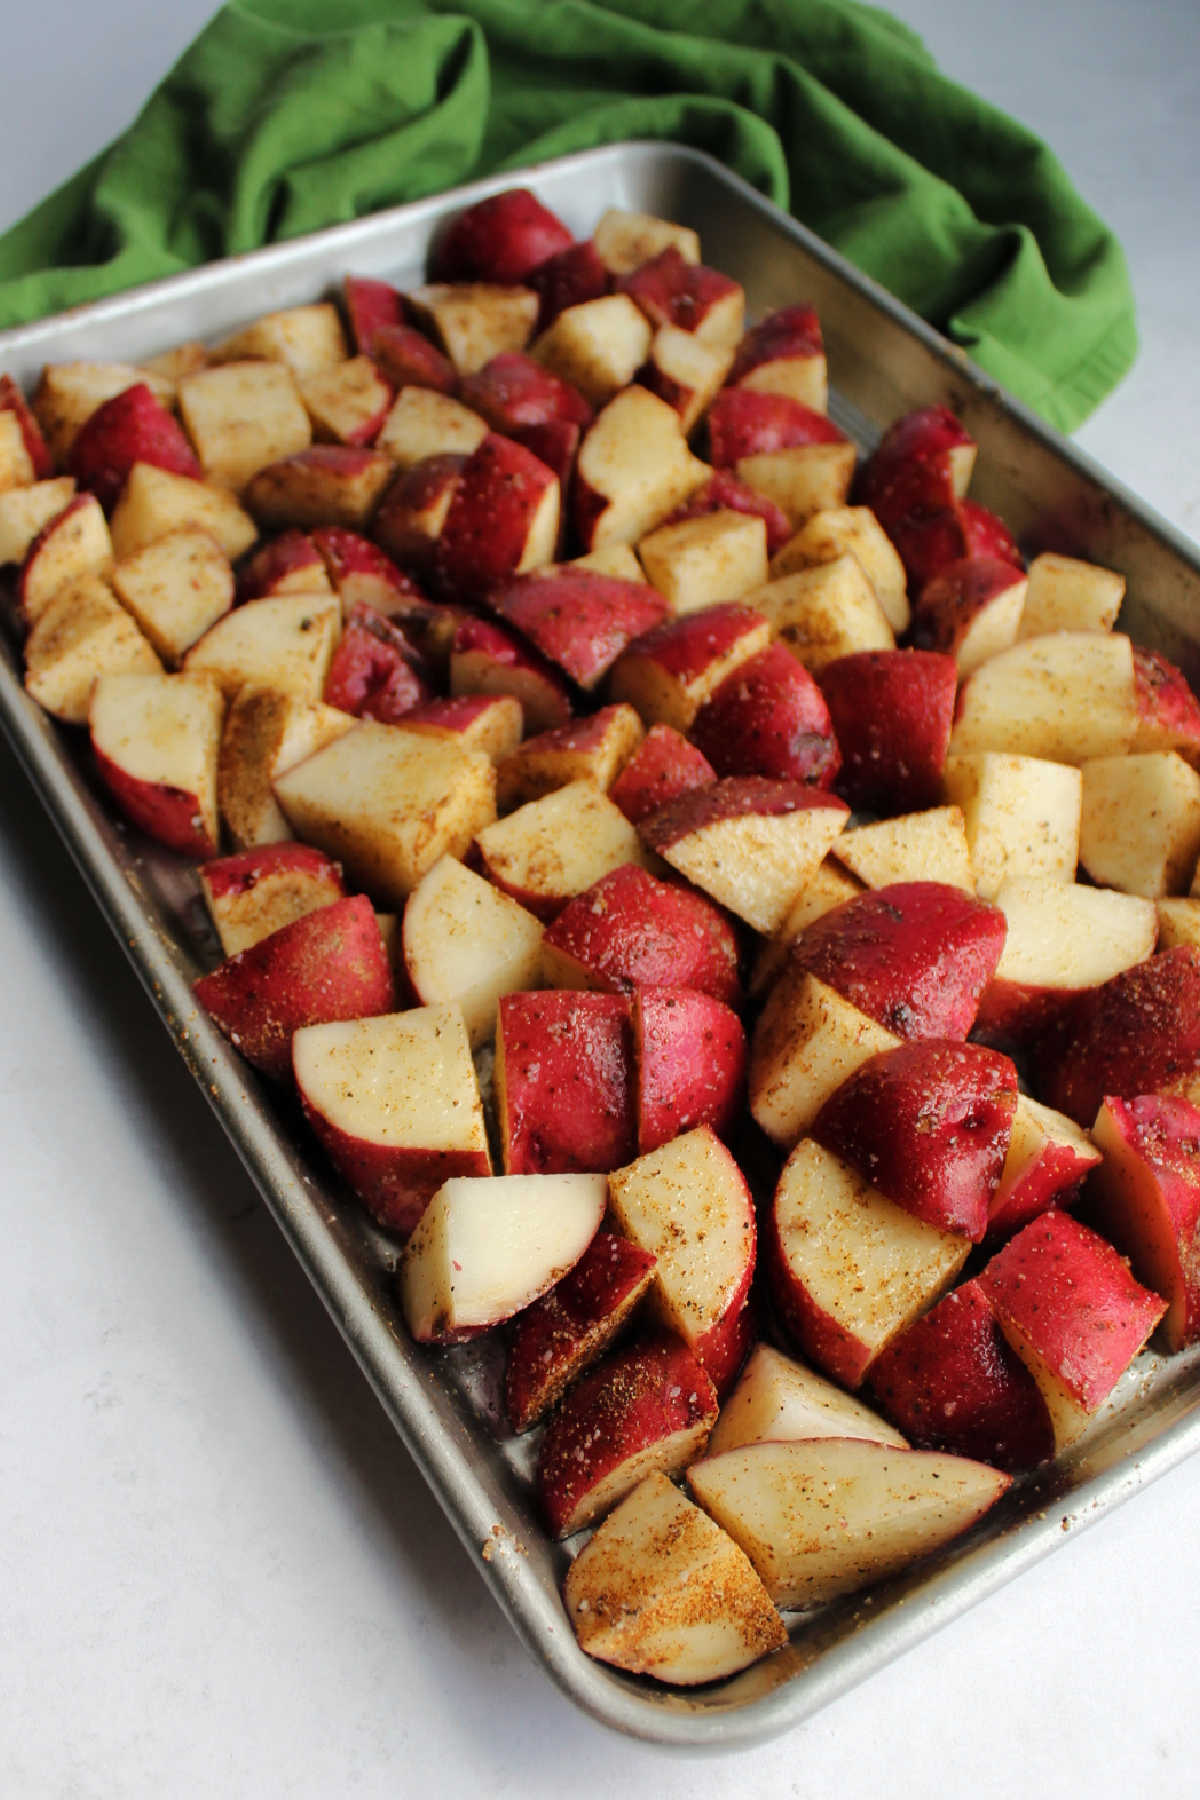 Chunks of red skin potato tossed in oil and seasonings on baking sheet ready to go in the oven.